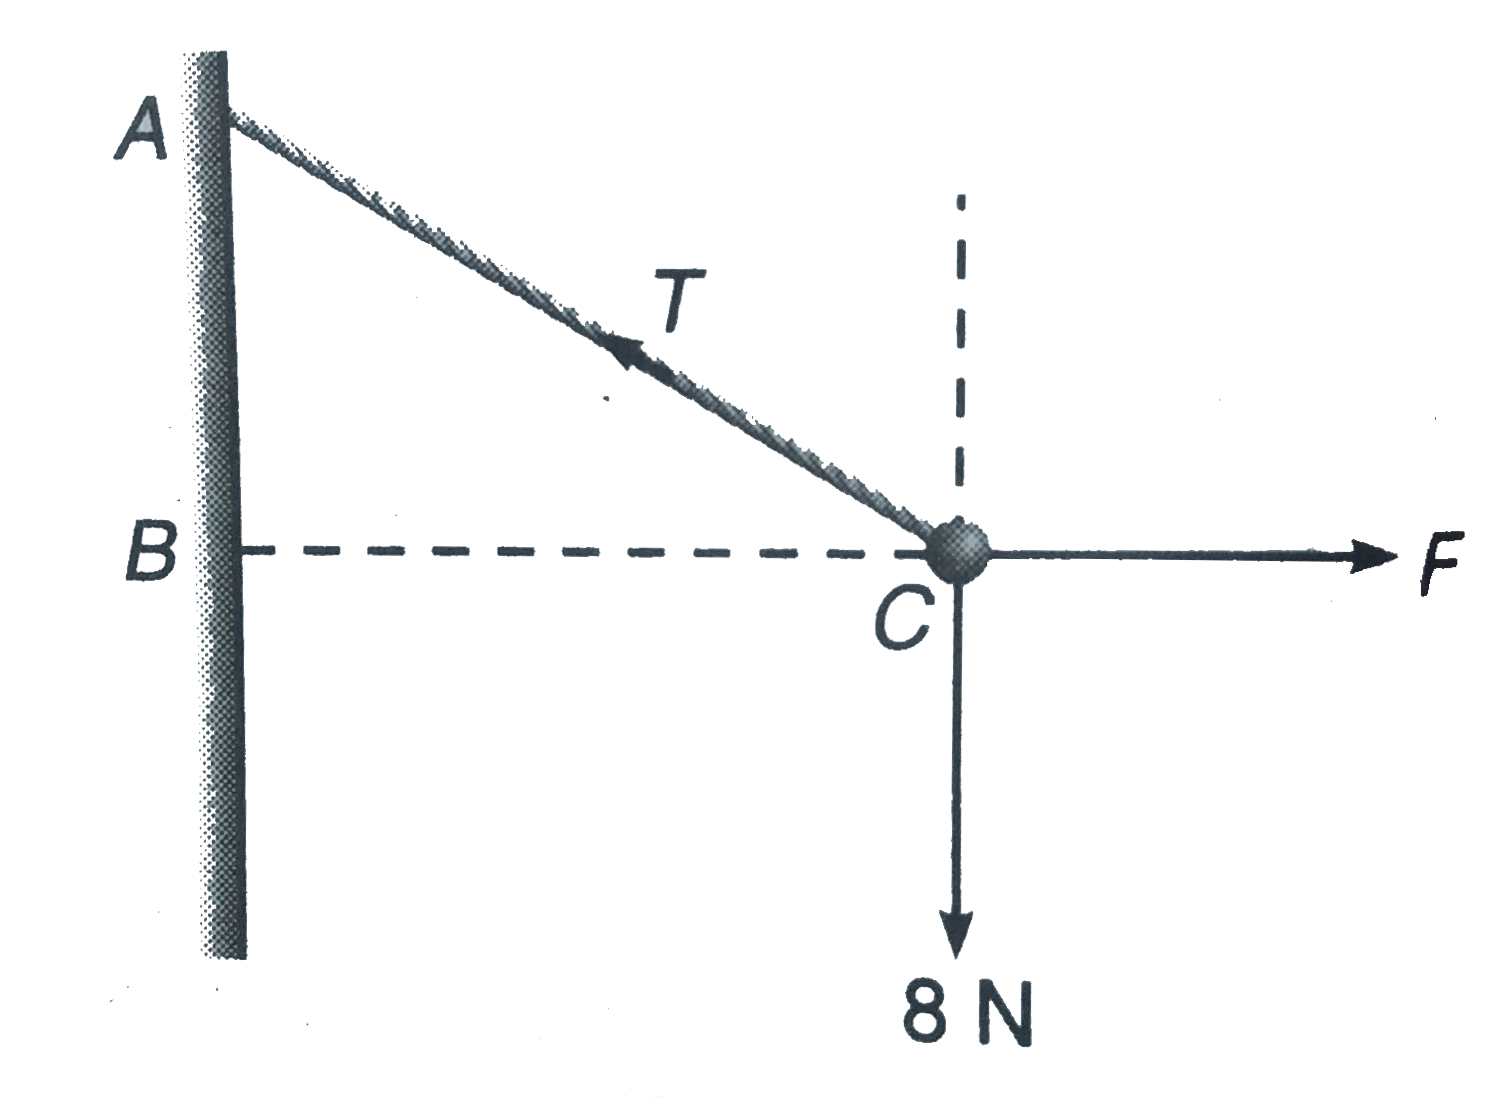 One end of a string 0.5 m long is fixed to a point A and the other end is fastened to a small object of weight 8 N. The object is pulled aside by a horizontal force F, until it is 0.3 m from the vertical through A.Find the magnitude of the tension T in the string and force F.